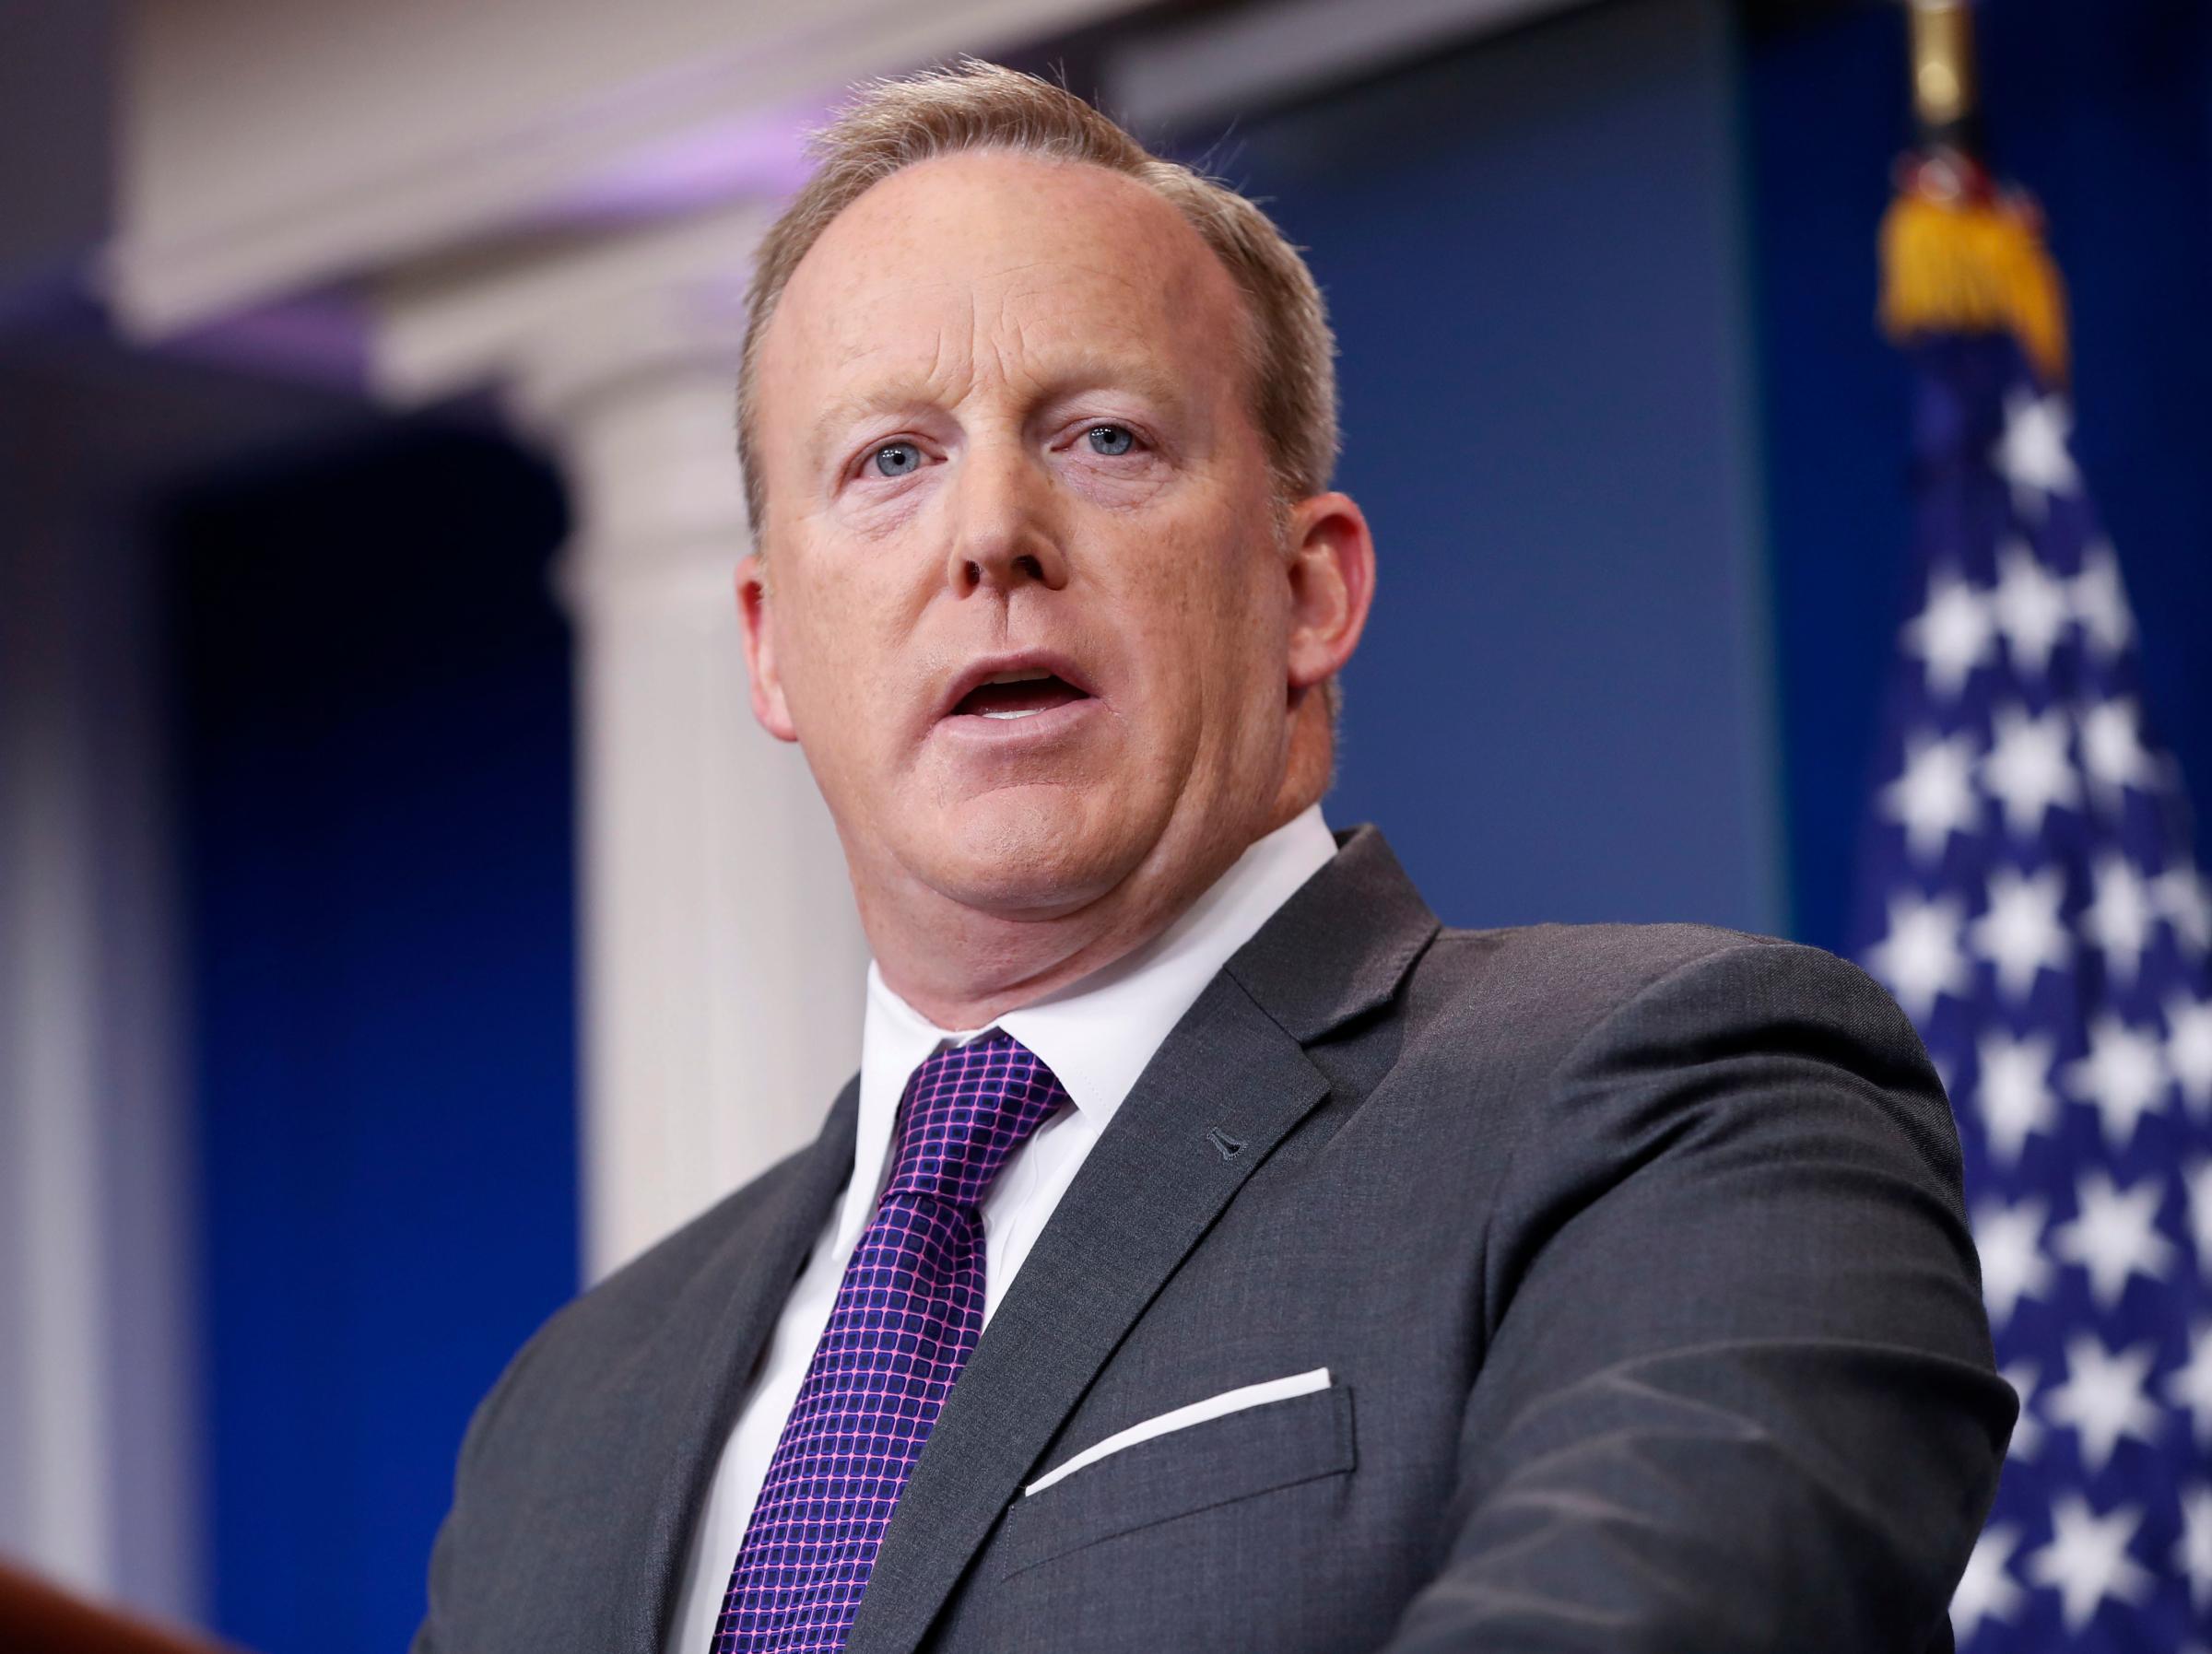 White House press secretary Sean Spicer speaks to members of the media in the Brady Briefing room of the White House in Washington, July 17, 2017.